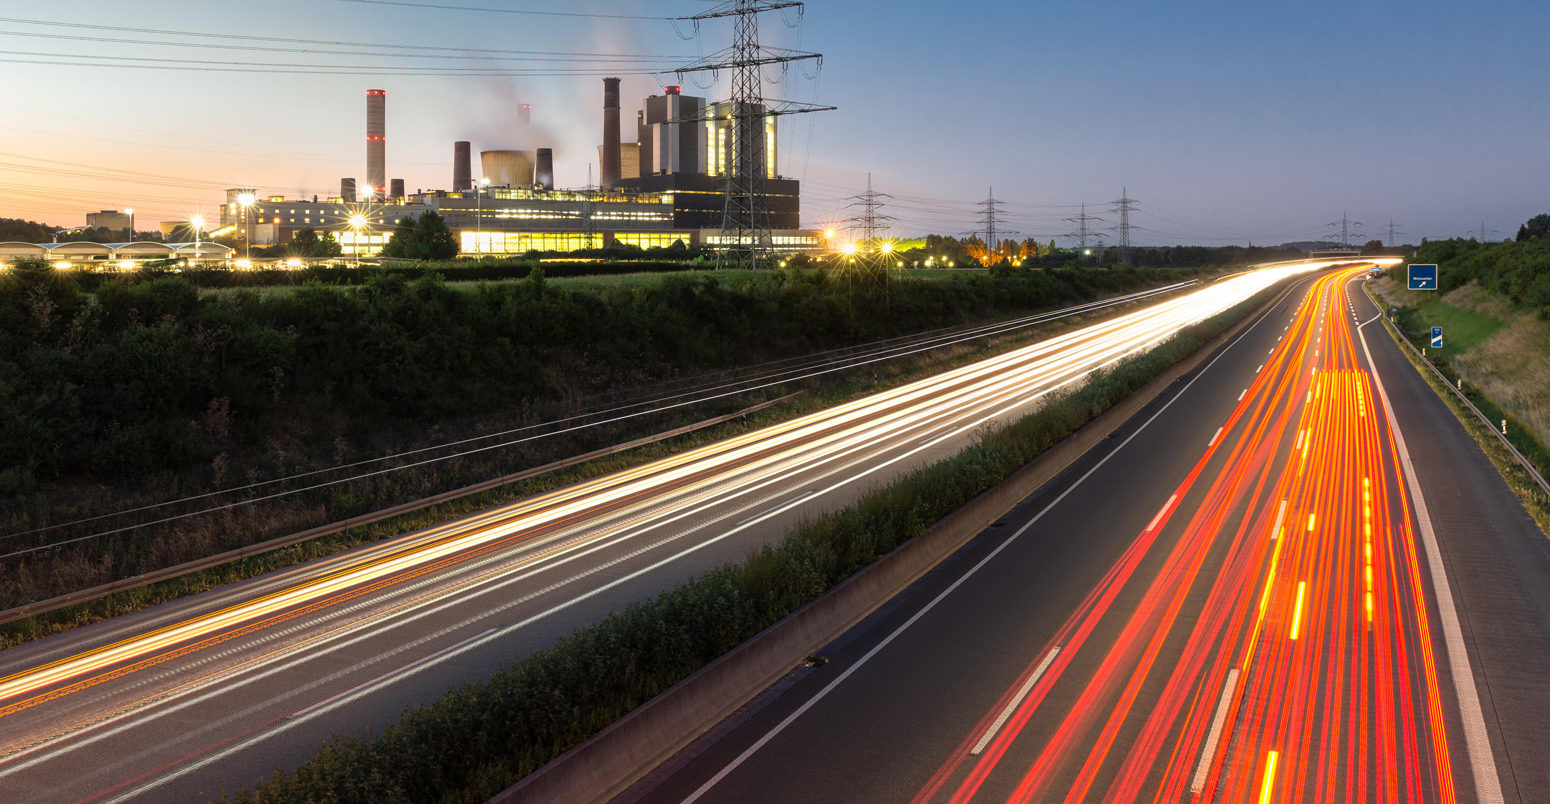 Long exposure sunset over German highway along power plant , Germany Credit: Zoonar GmbH / Alamy Stock Photo